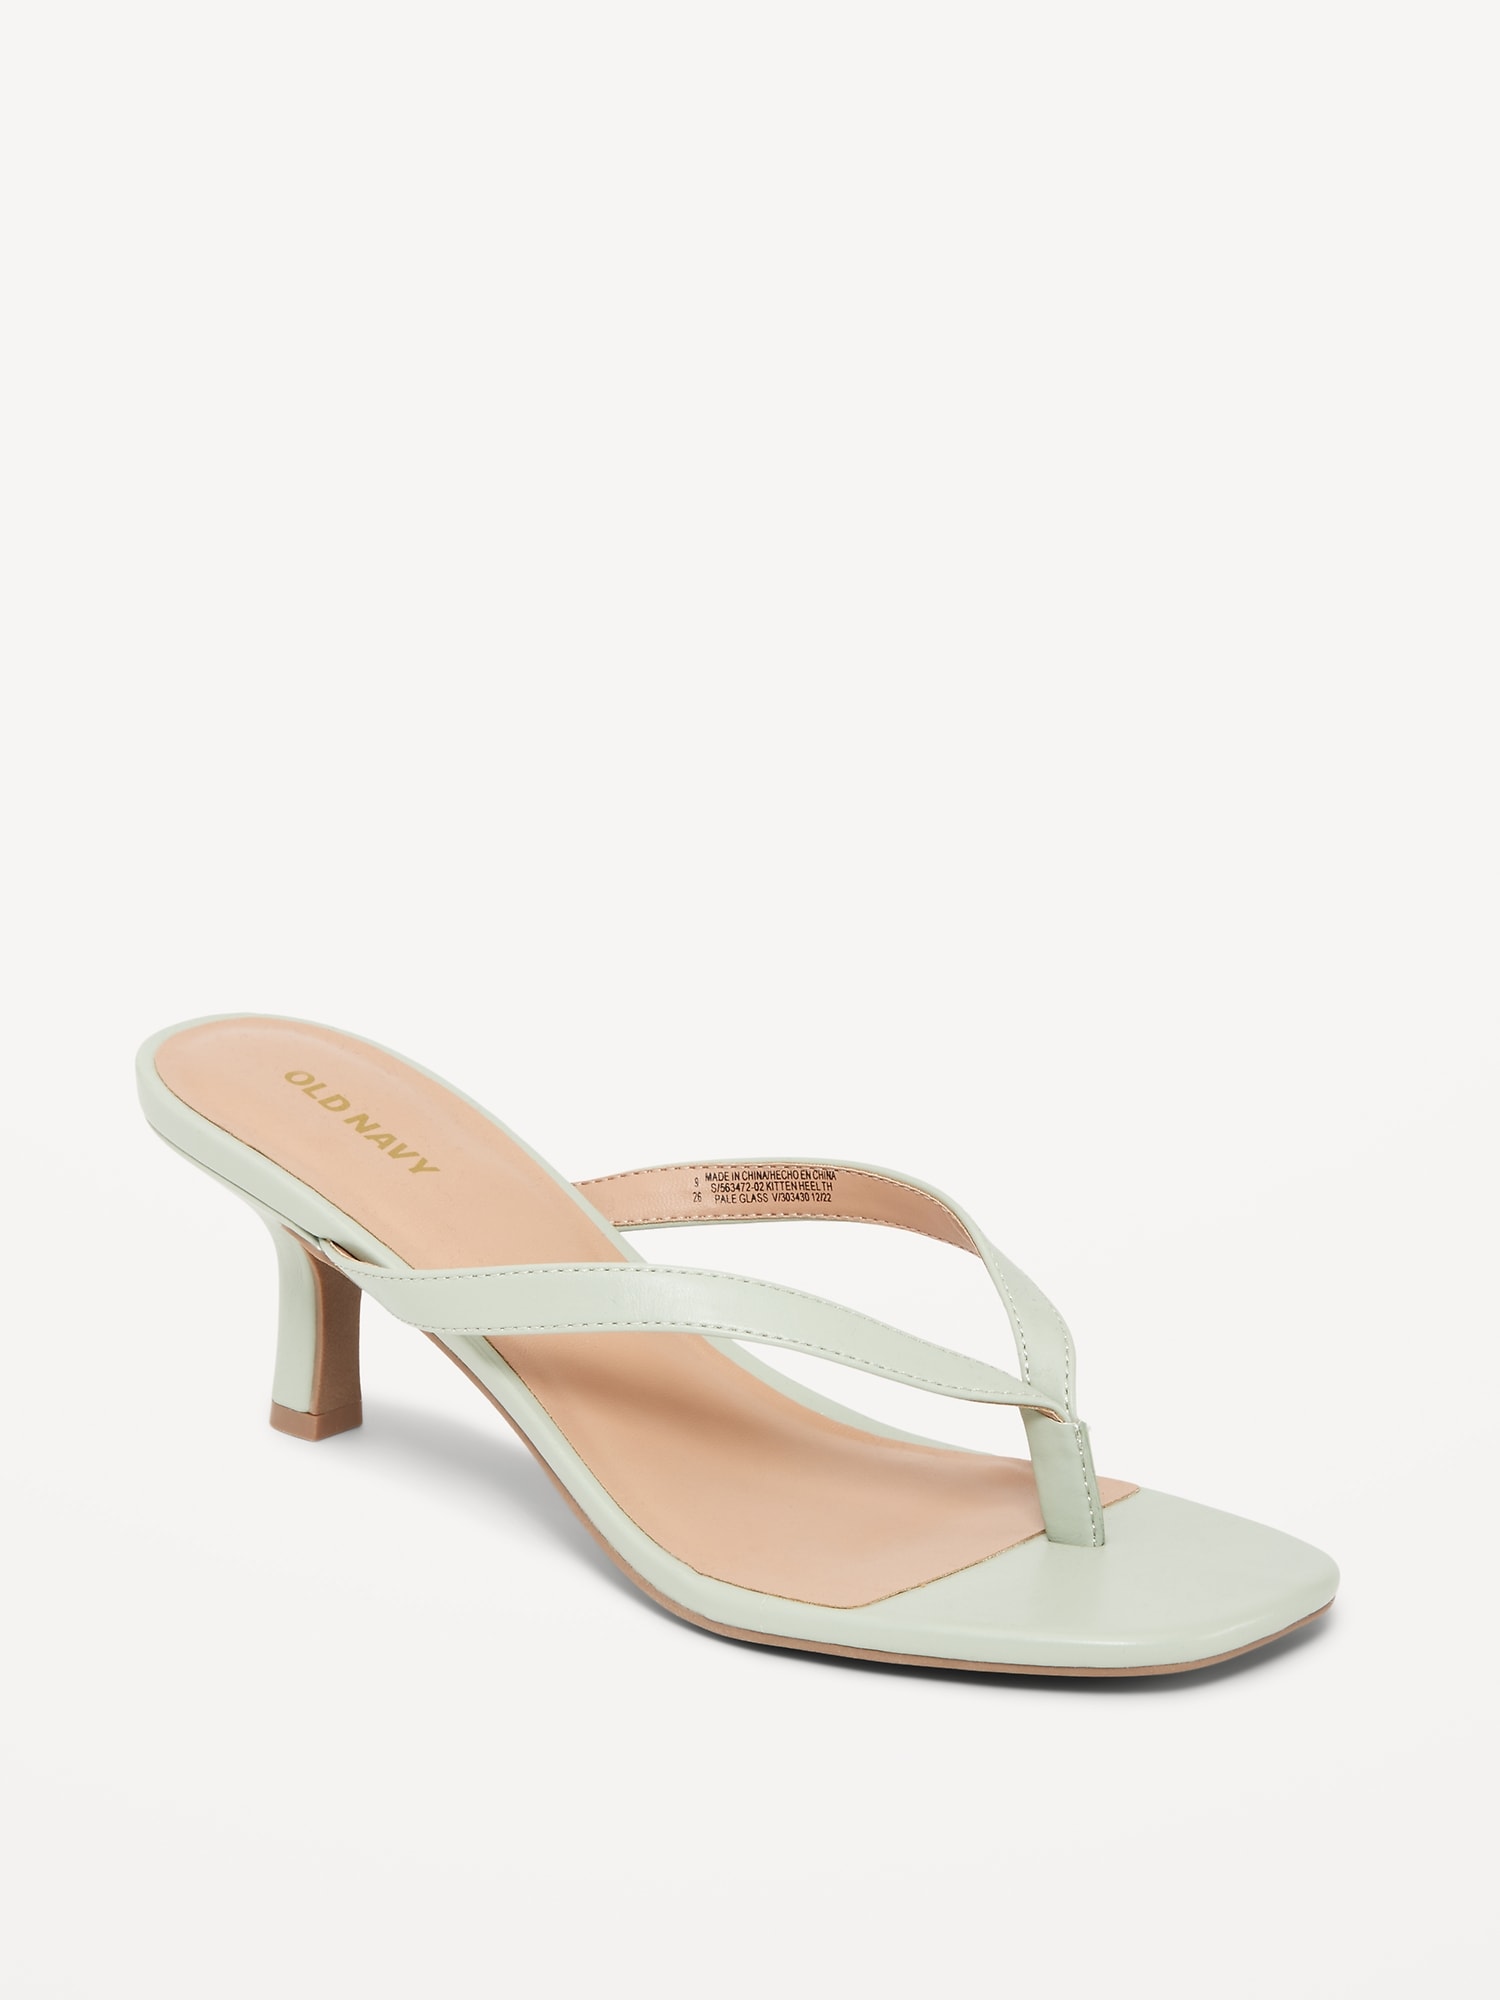 Faux-Leather Kitten-Heel Thong Mule Sandals for Women | Old Navy